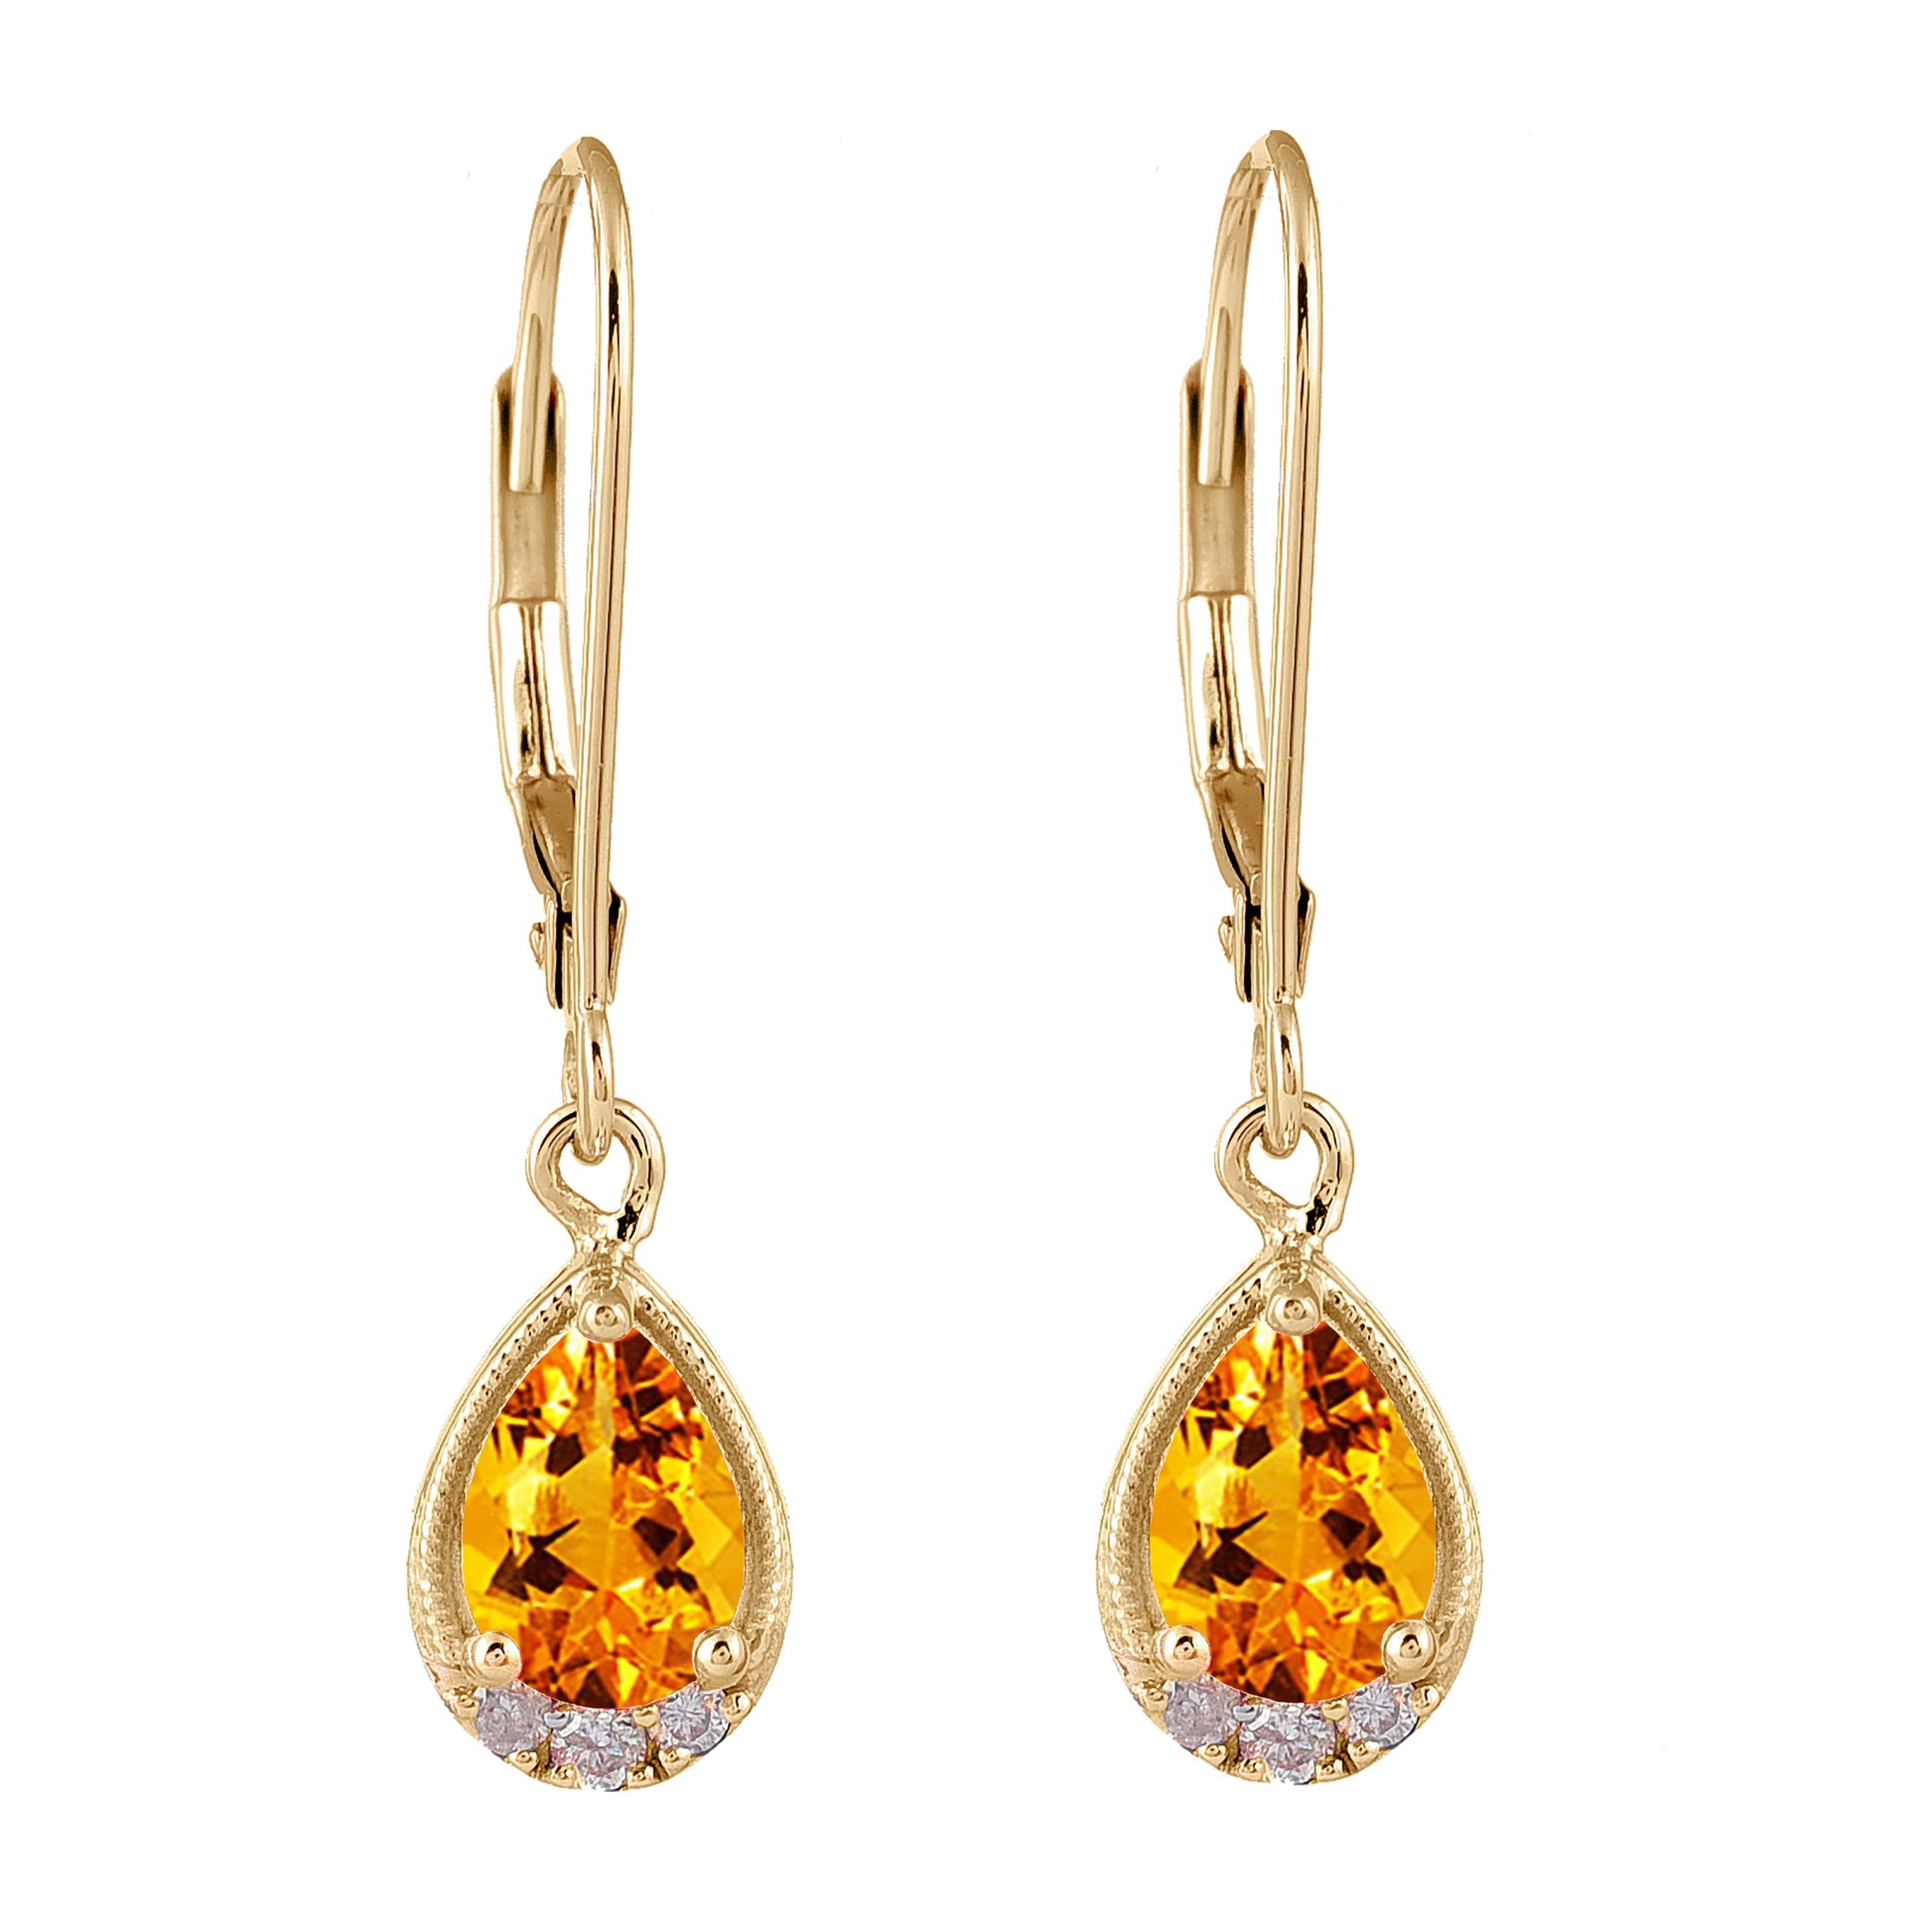 Dazzling Citrine Earrings that will Turn Heads